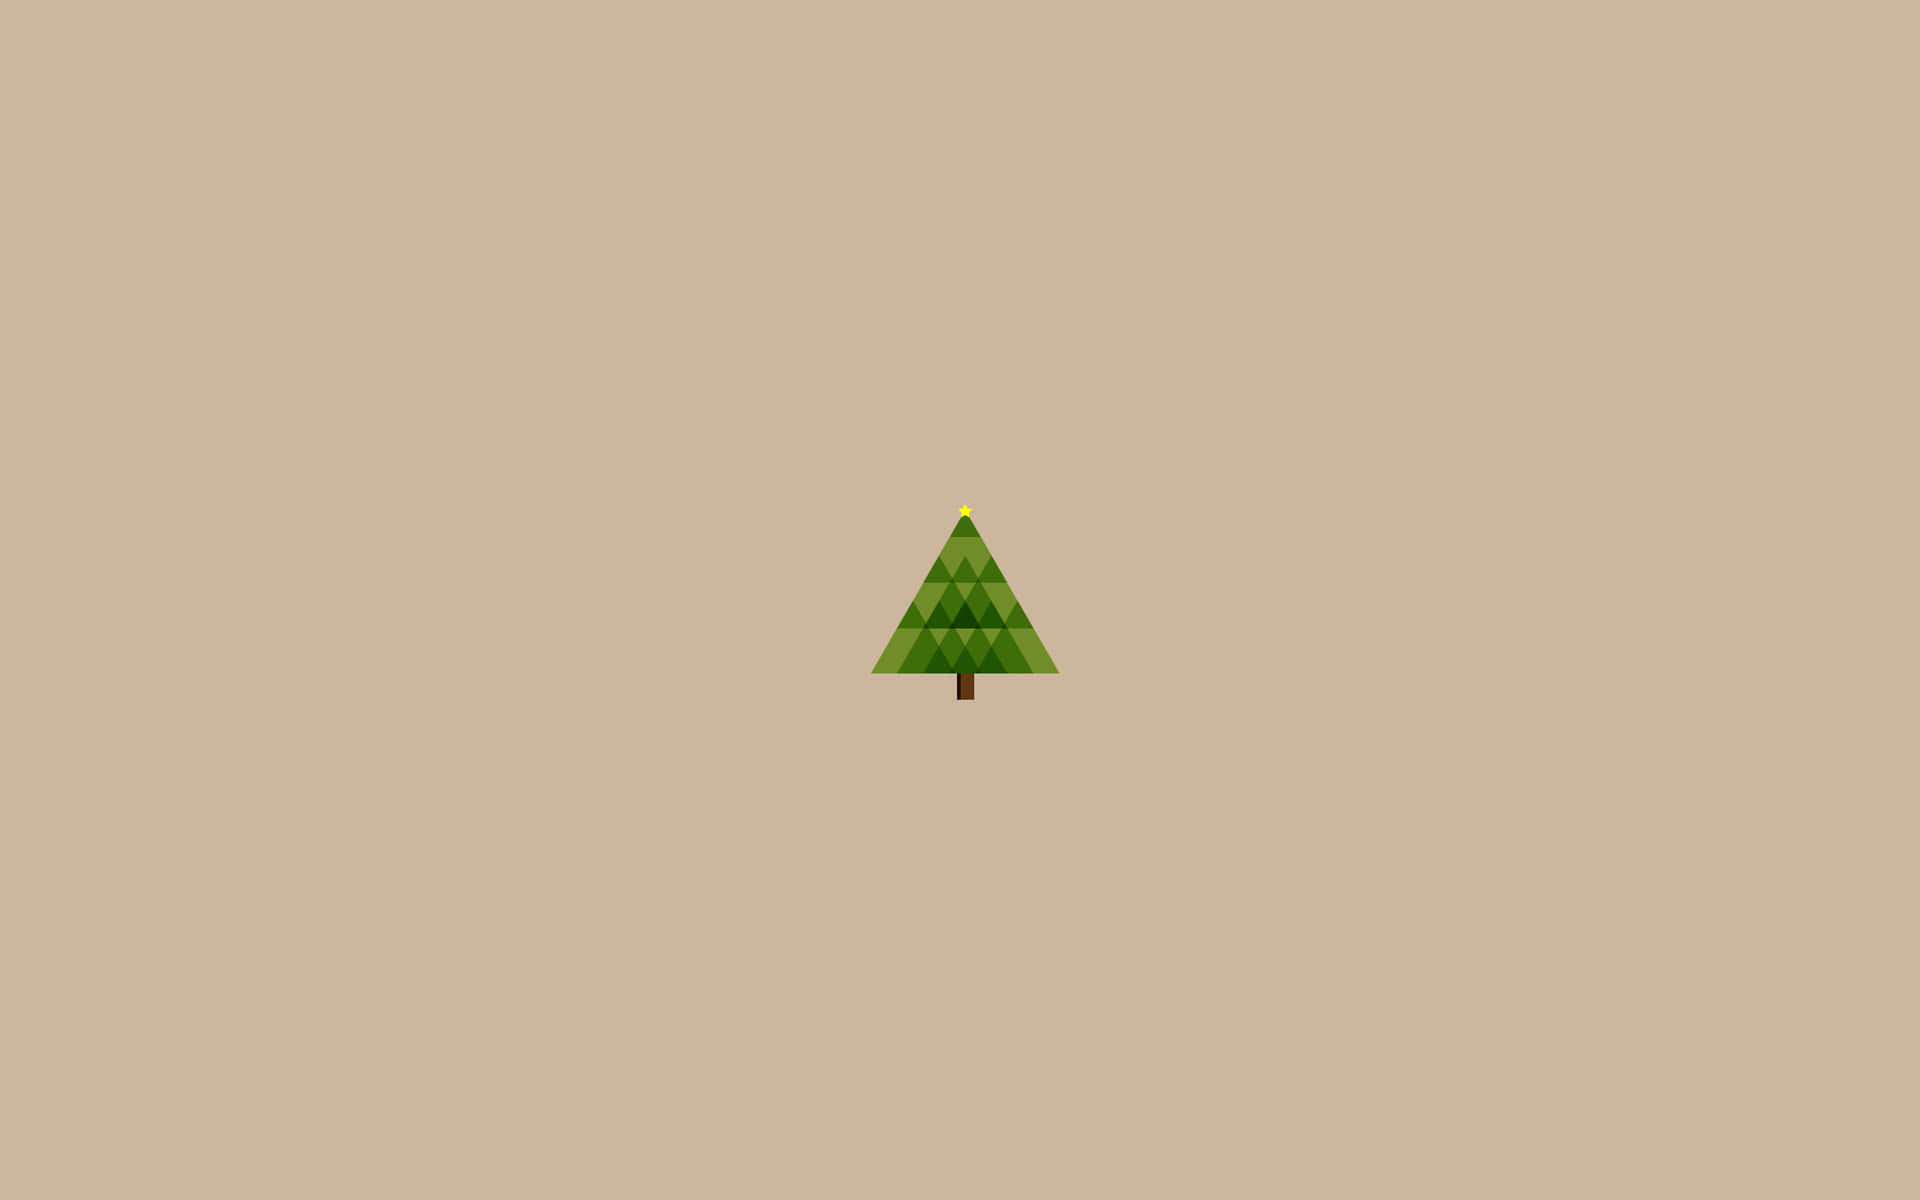 A Small Christmas Tree On A Beige Background Wallpaper